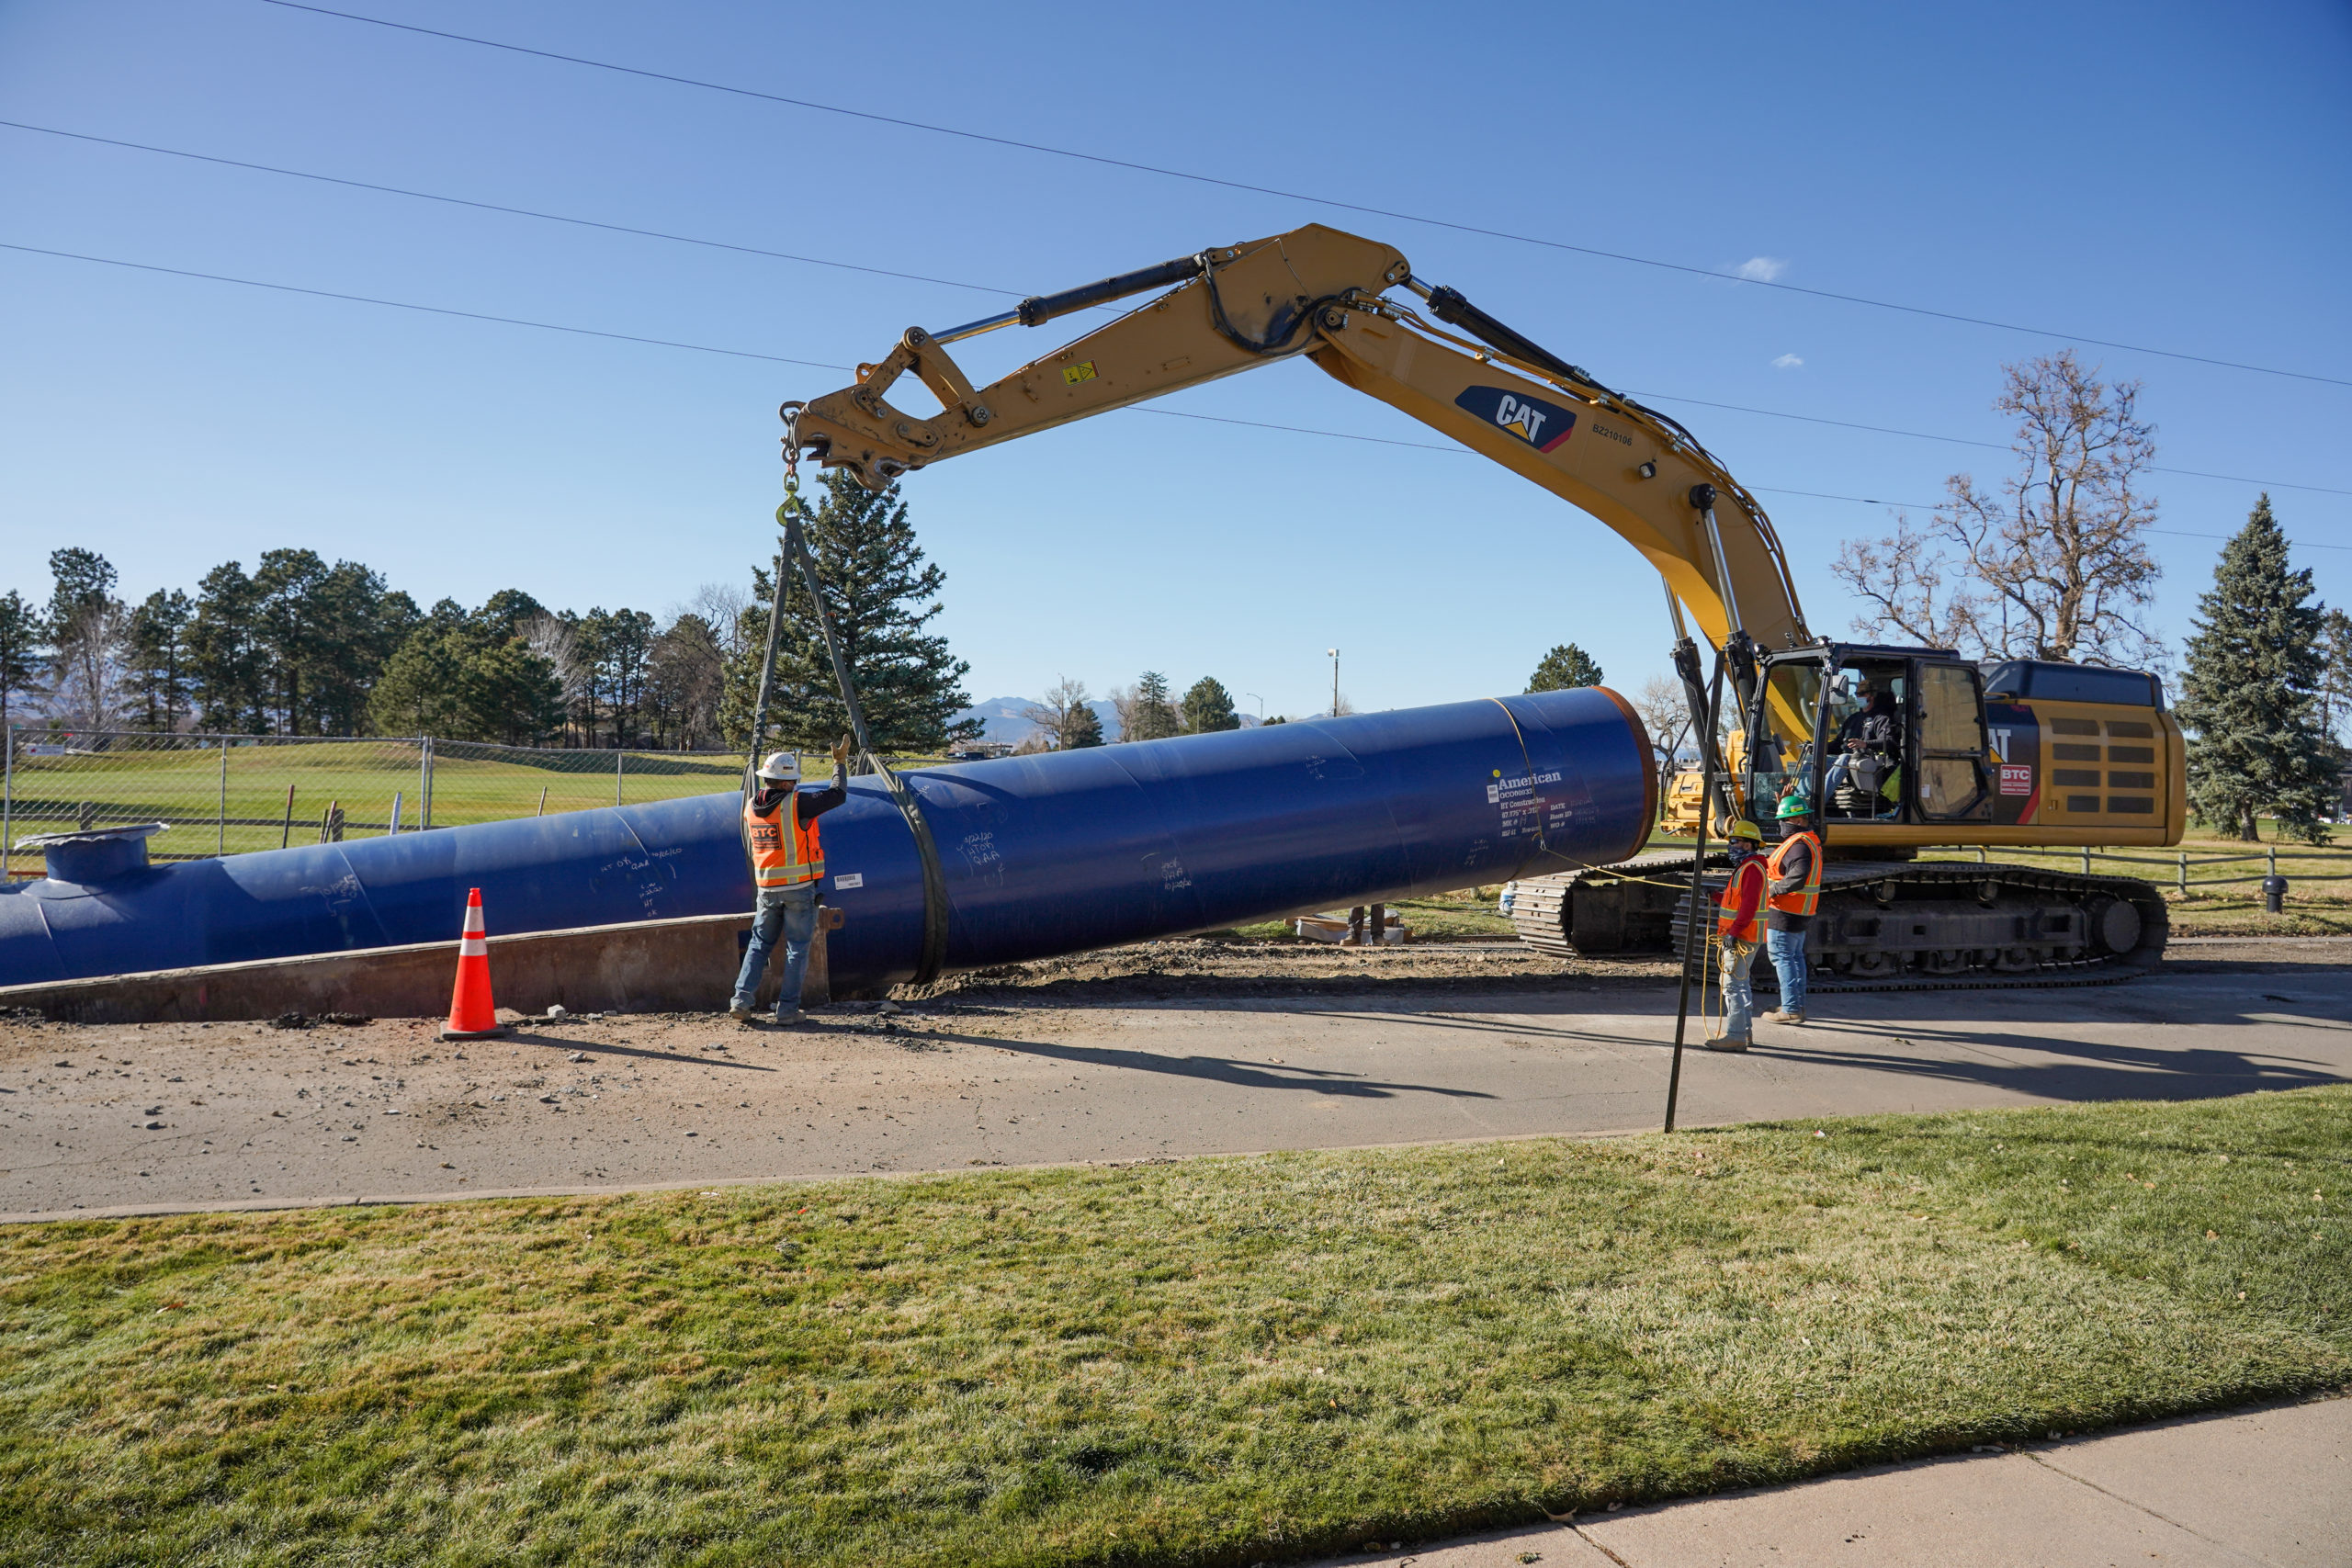 The large water pipes are 50 feet long, 66 inches in diameter and weigh 11,500 pounds. Photo credit: Denver Water.